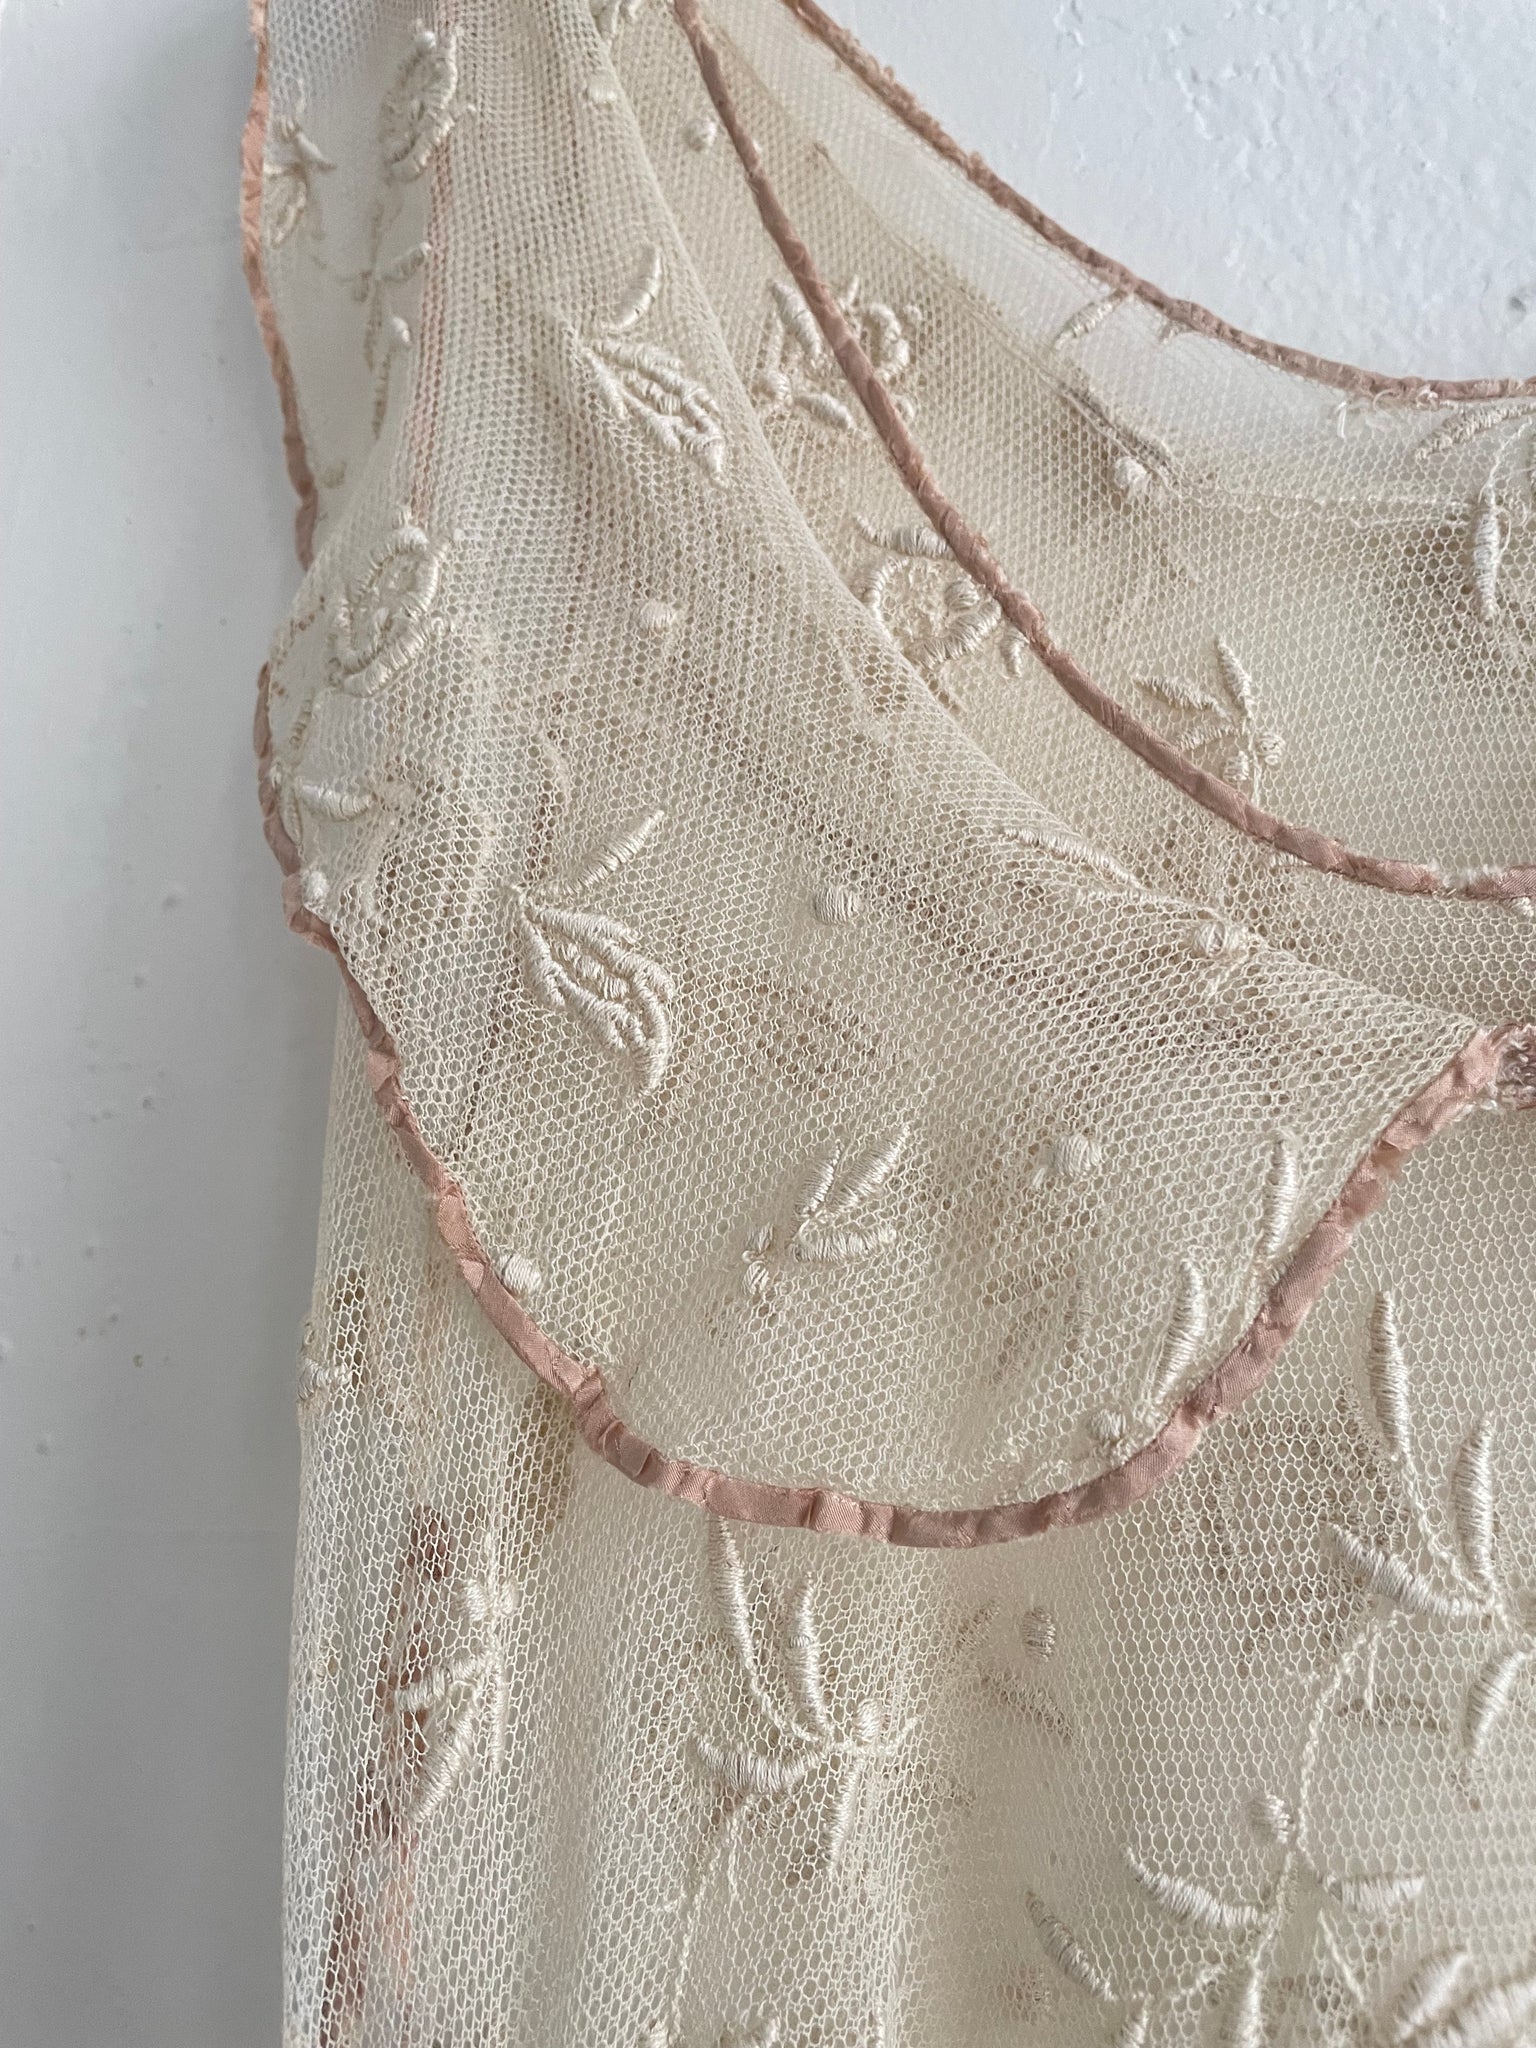 1930s Cream Tambour Lace Embroidered Net Gown Tiered Dress